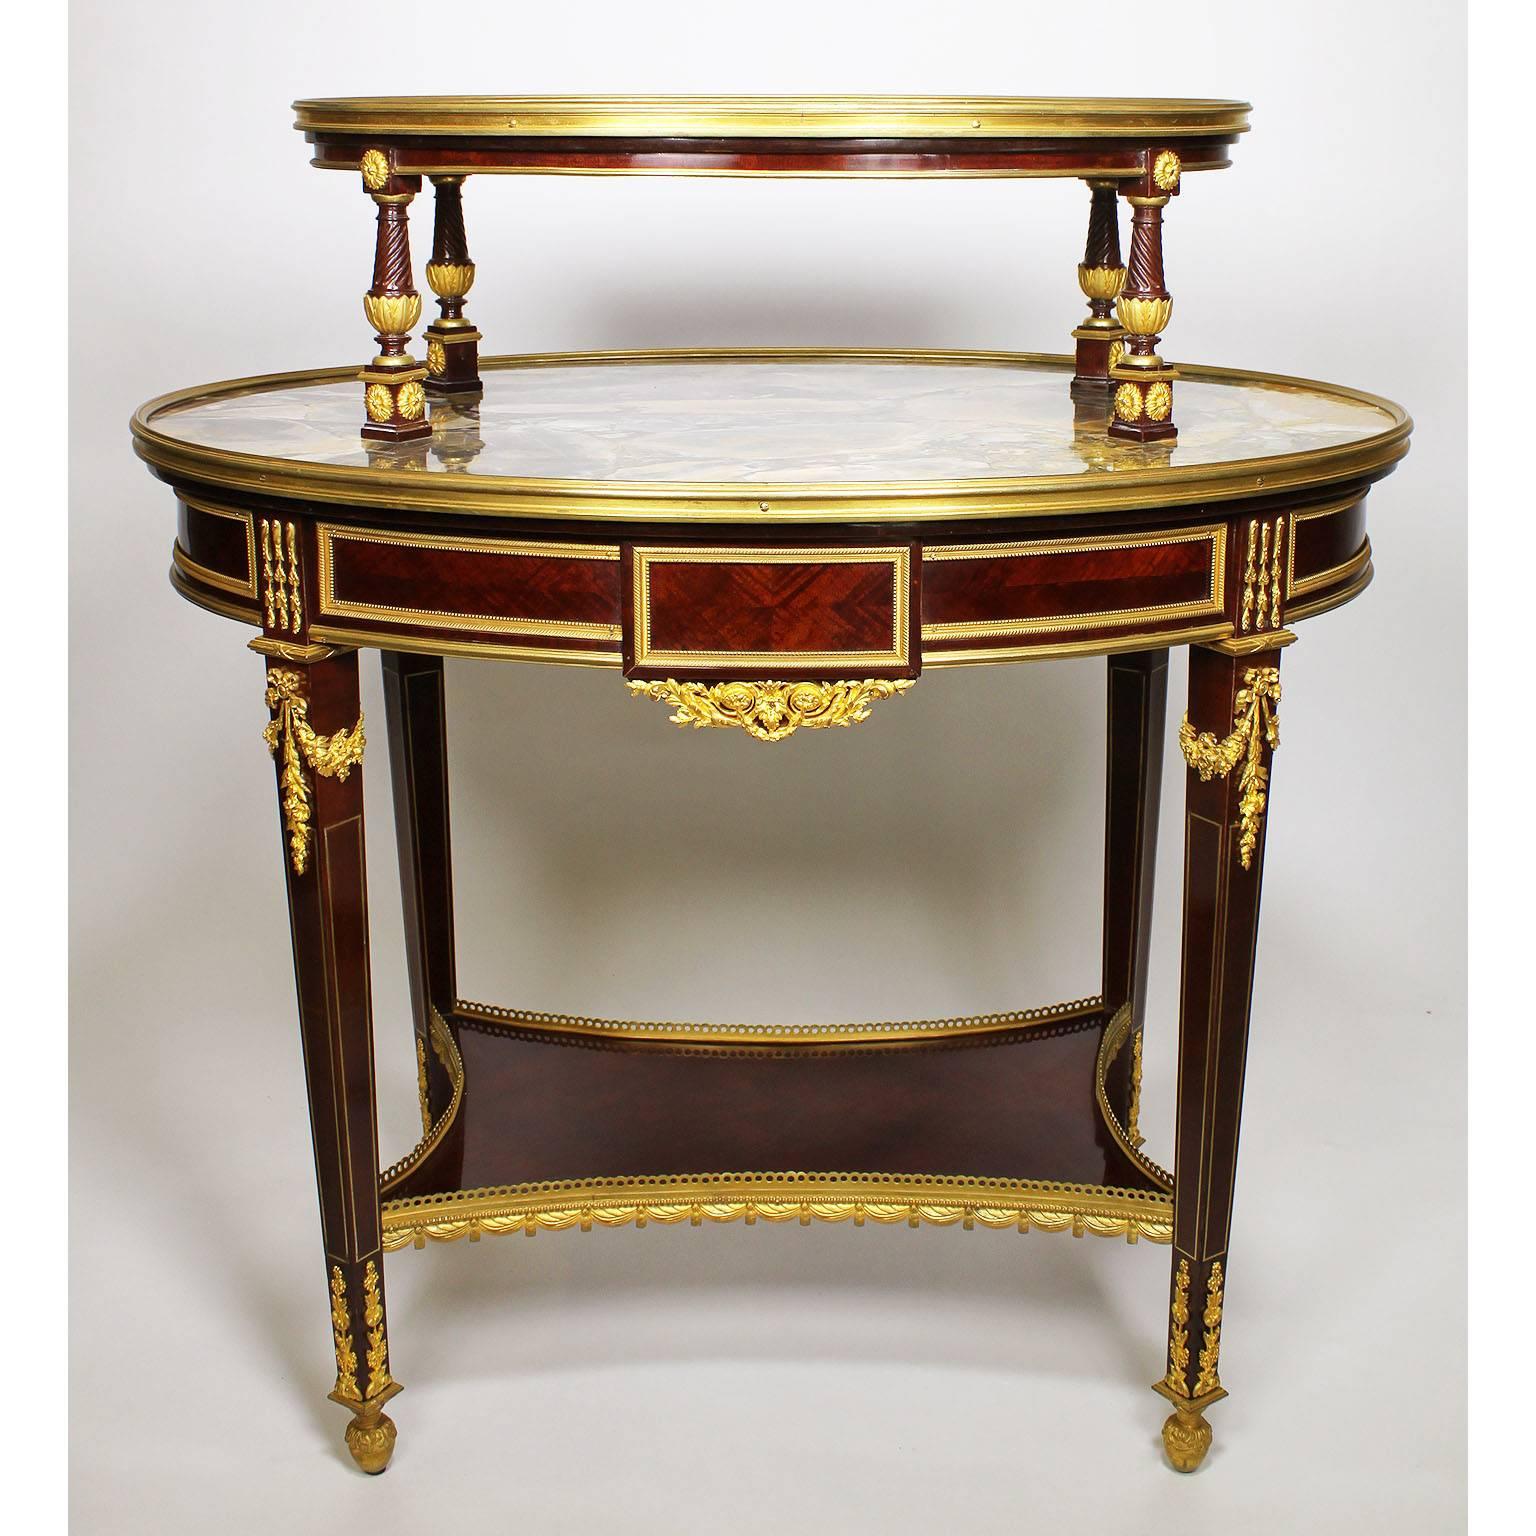 A very fine French, 19th century Louis XVI style ormolu-mounted mahogany two-tier tea-table etagere attributed to François Linke (1855-1946). The oval Basque Jaspe marble top with a gilt-bronze trimmed frame supported by four scrolled mahogany